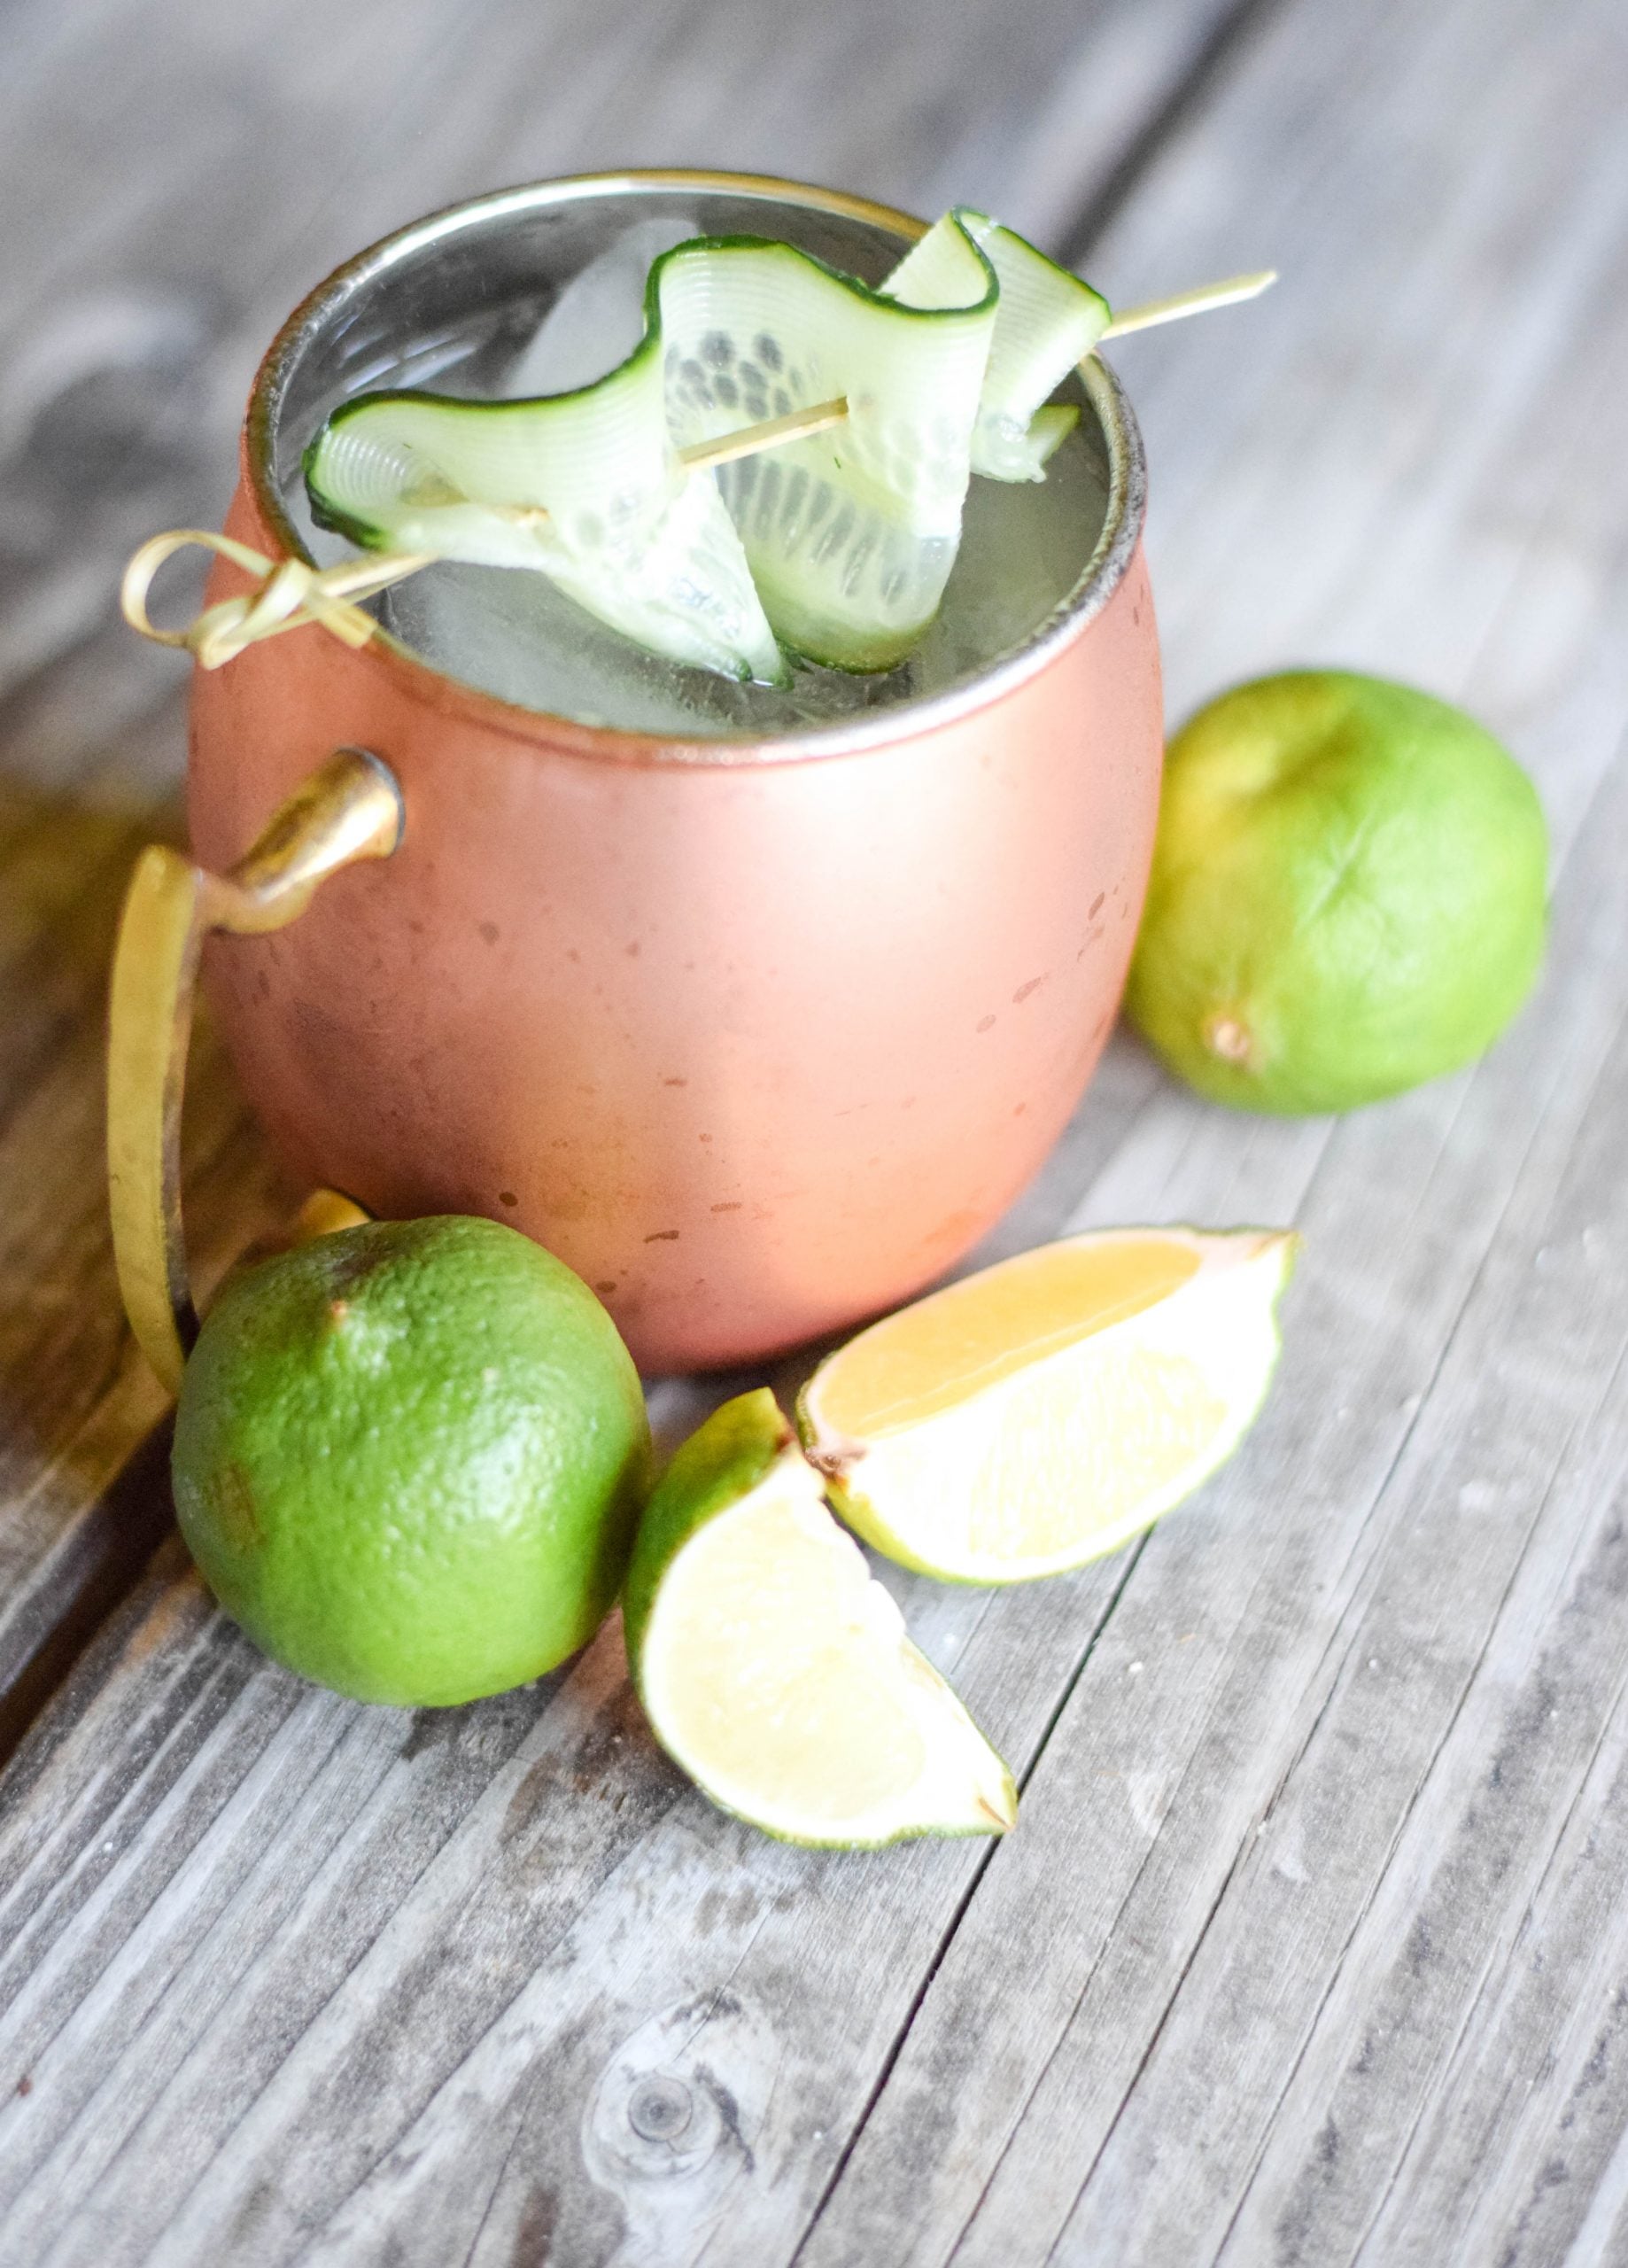 Cucumber Mule Cocktail - An easy and refreshing cocktail made using Hanson Organic Cucumber Vodka + just two other ingredients! | Cucumber Mule Recipe - Cucumber Vodka Mule - Cucumber Moscow Mule - Hanson Organic Vodka - Hanson Vodka 